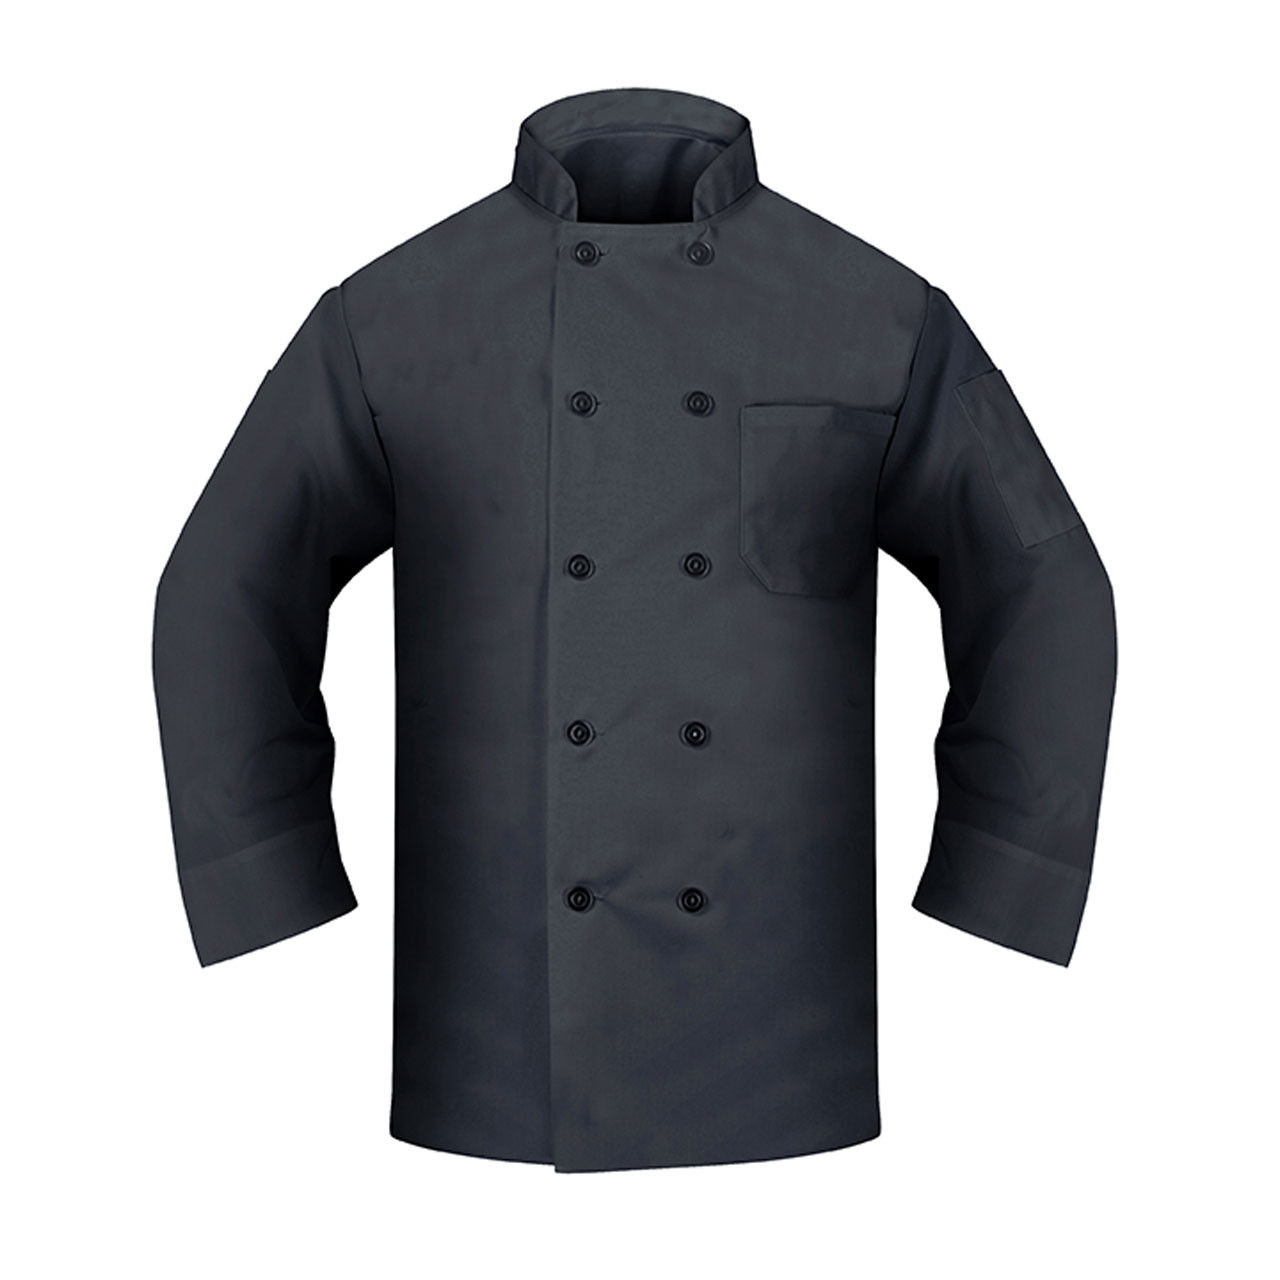 Before purchasing, what sizes are available for black chef coats?